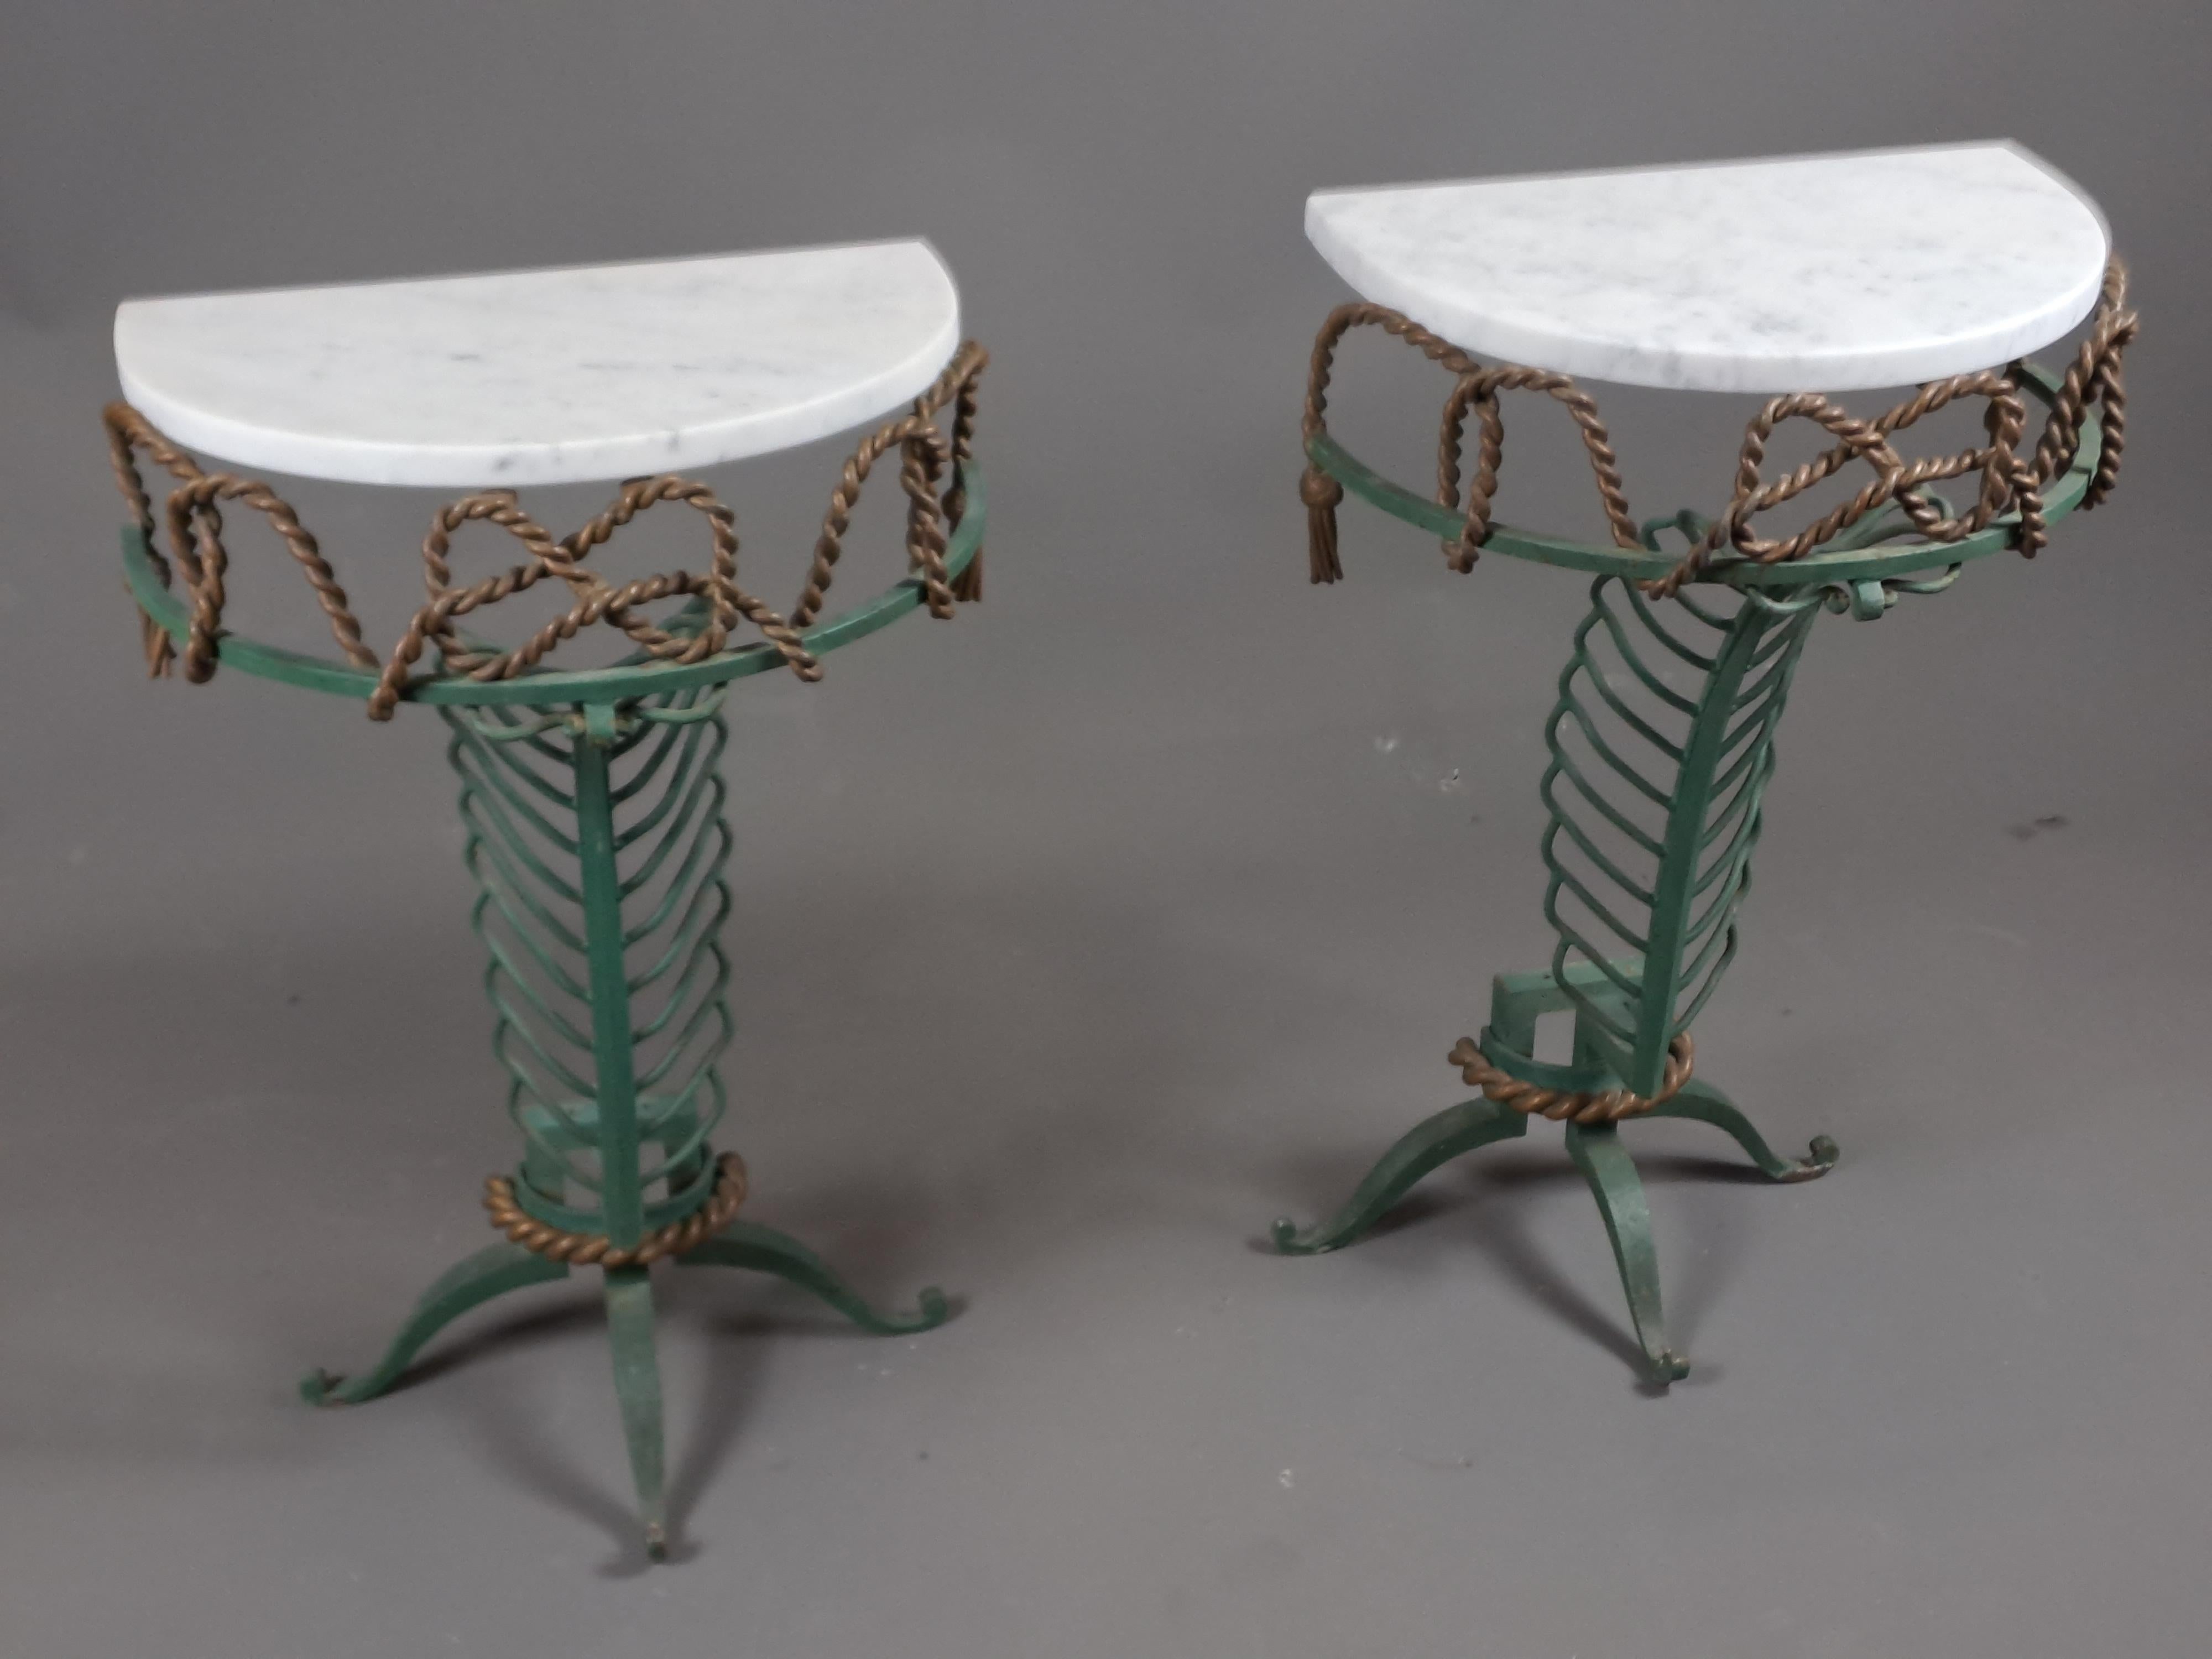 Lovely pair of small wrought iron consoles with double green and bronze patina, decorated with ribbed foliage and intertwined ropes.

Half-moon Carrara marble tops.

Beautiful creation attributed to Gilbert Poillerat, was part of a set including